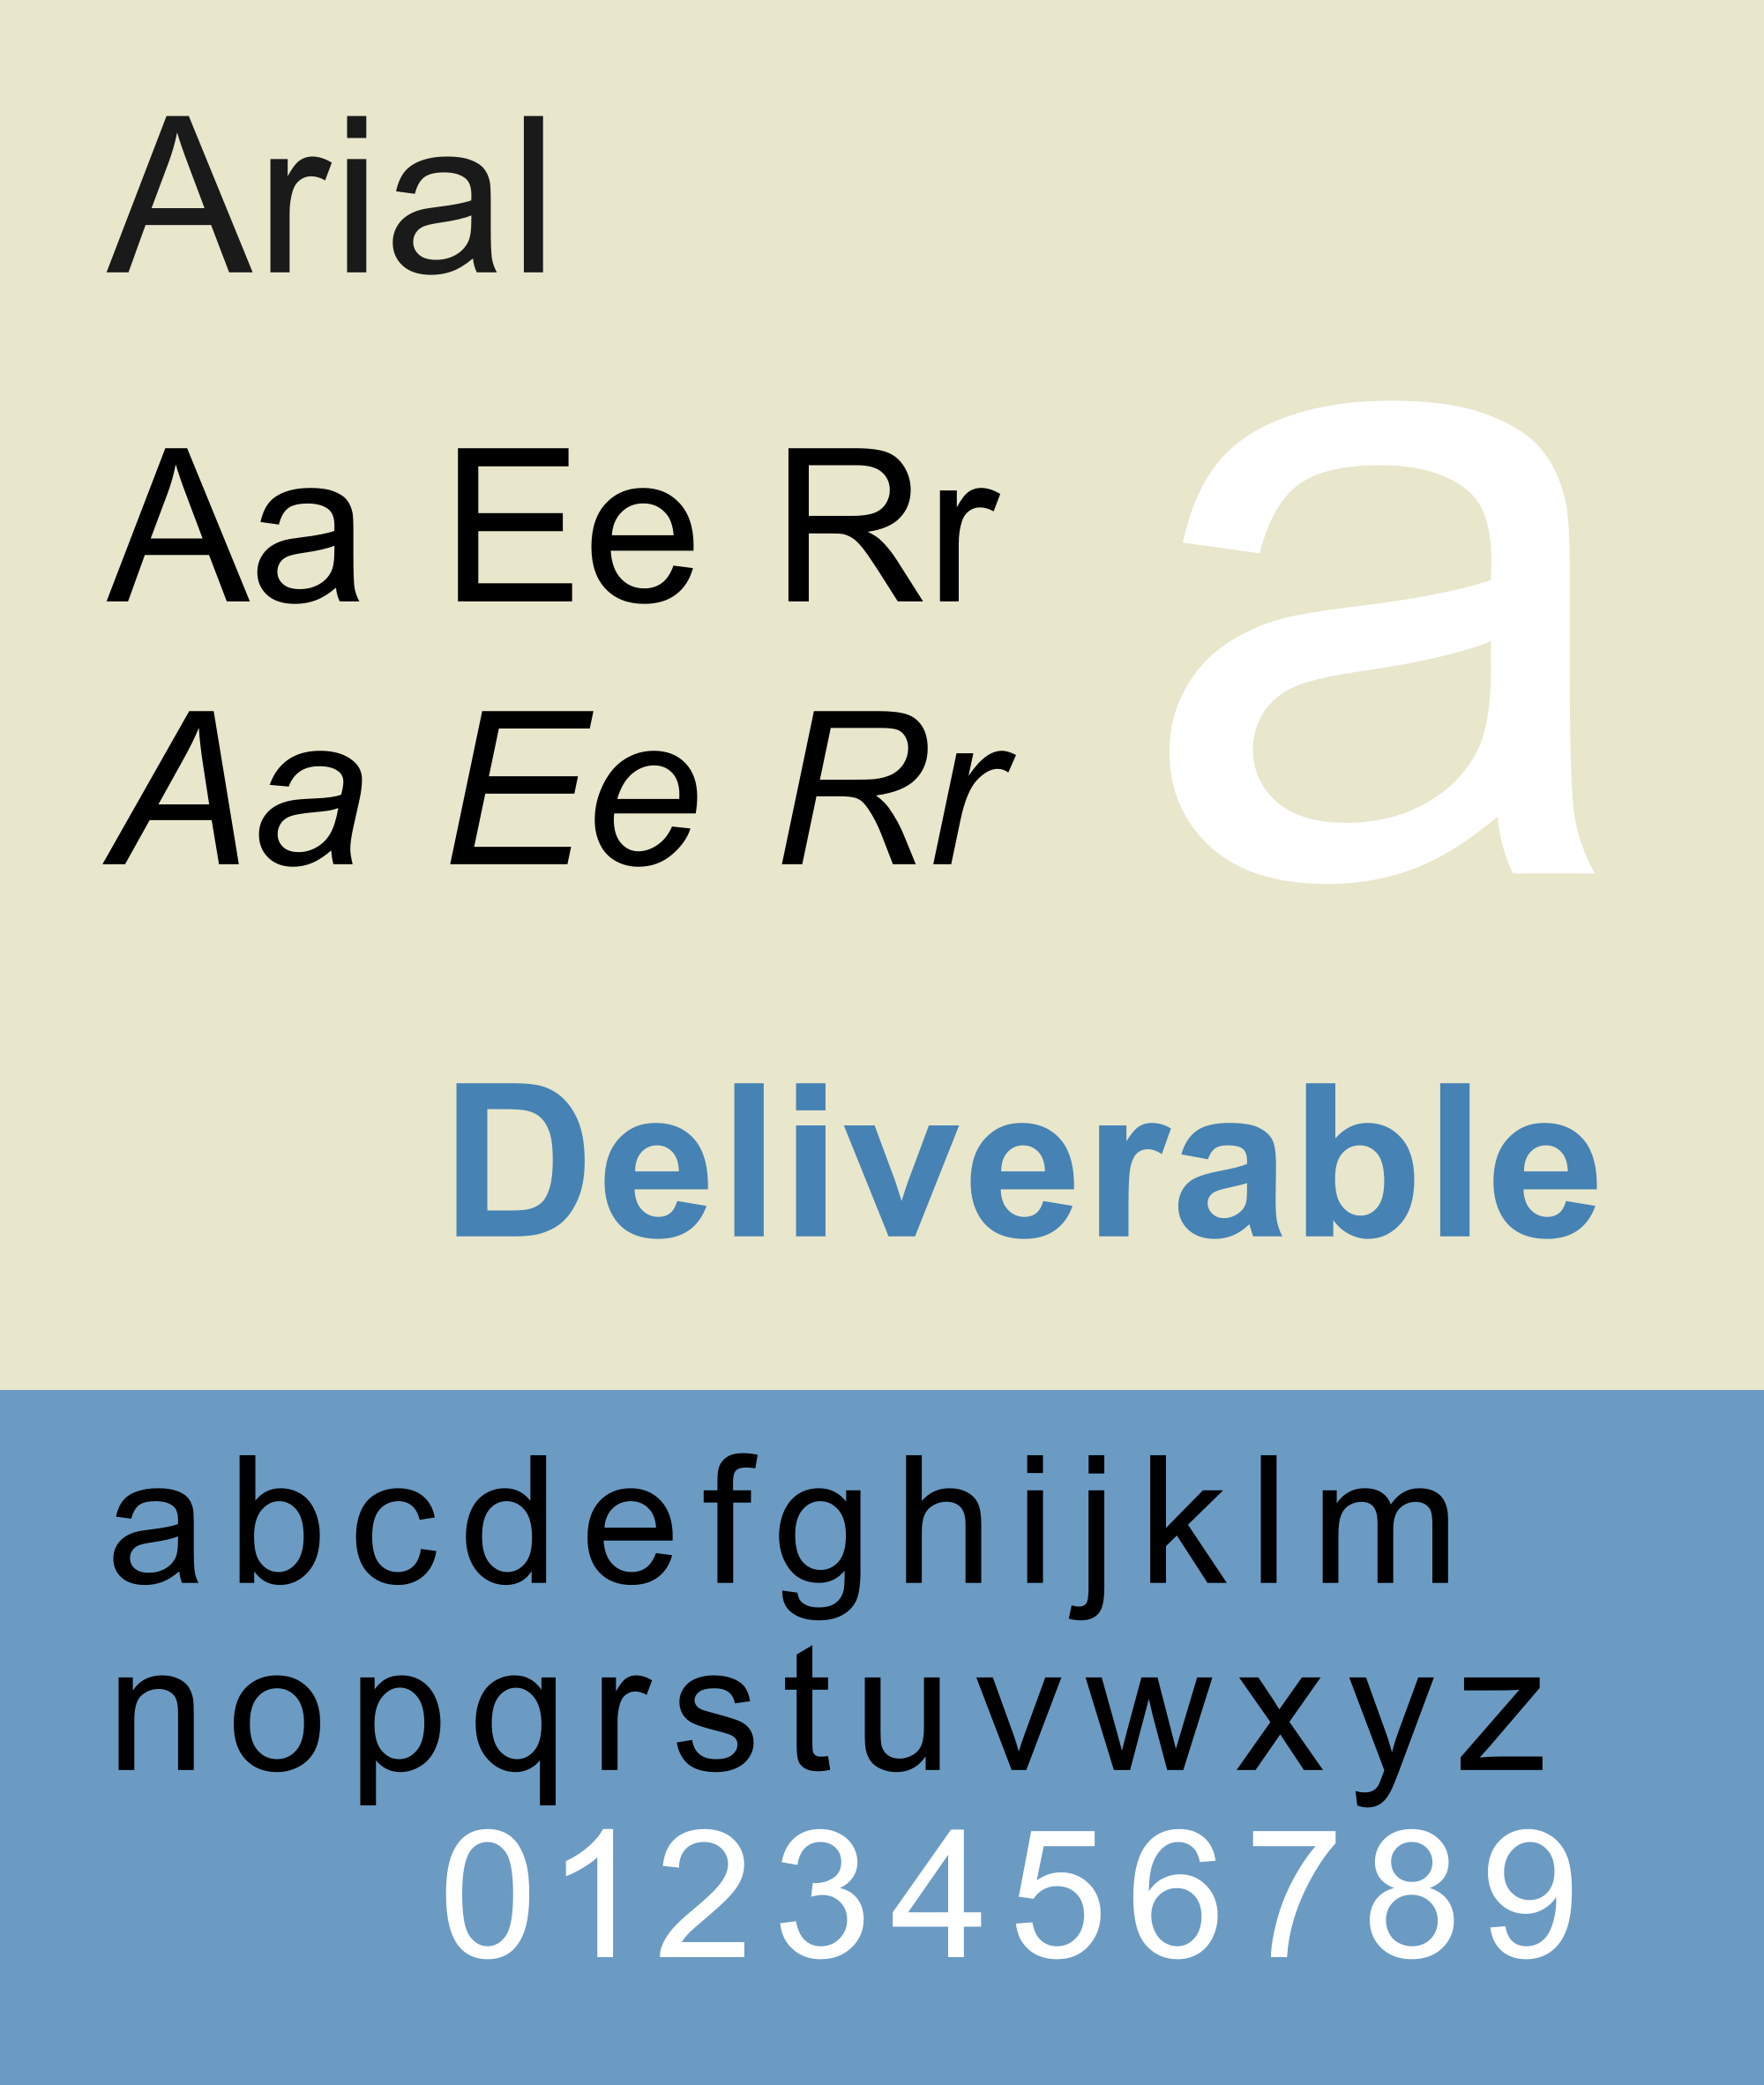 25 most used typefaces in advertising: Arial